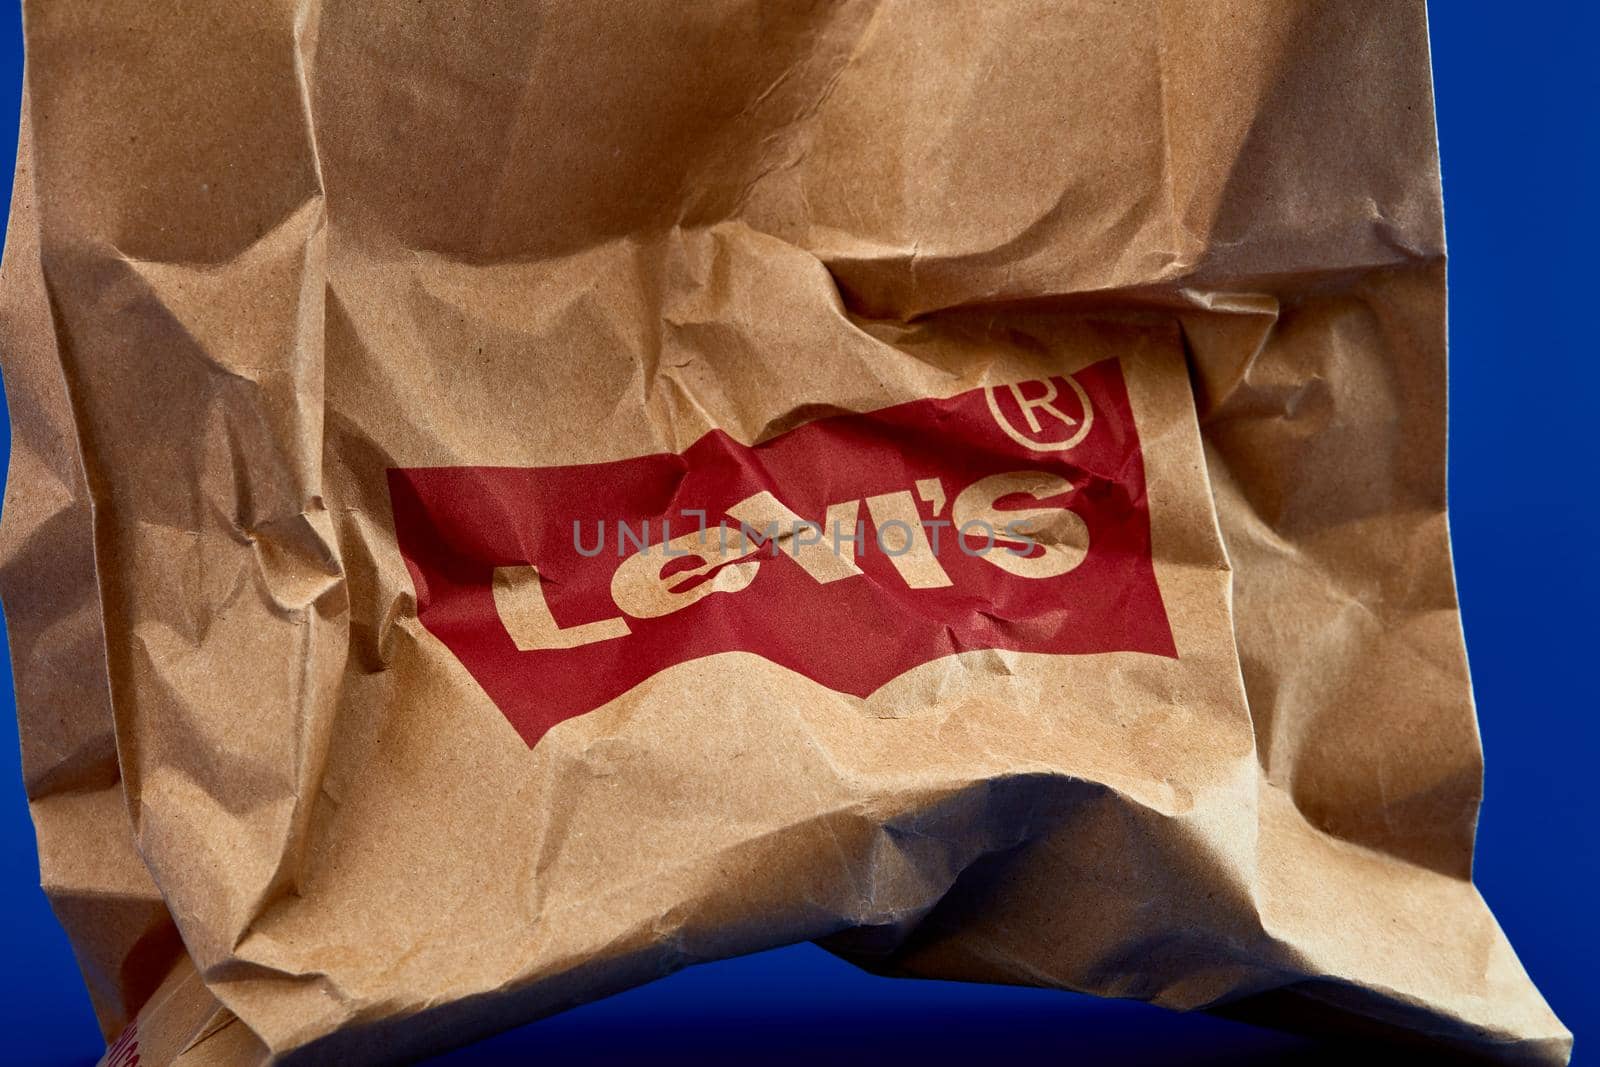 Levi's paper shopping bags. Crumpled Paper bag. 26.03.2020, Russia.